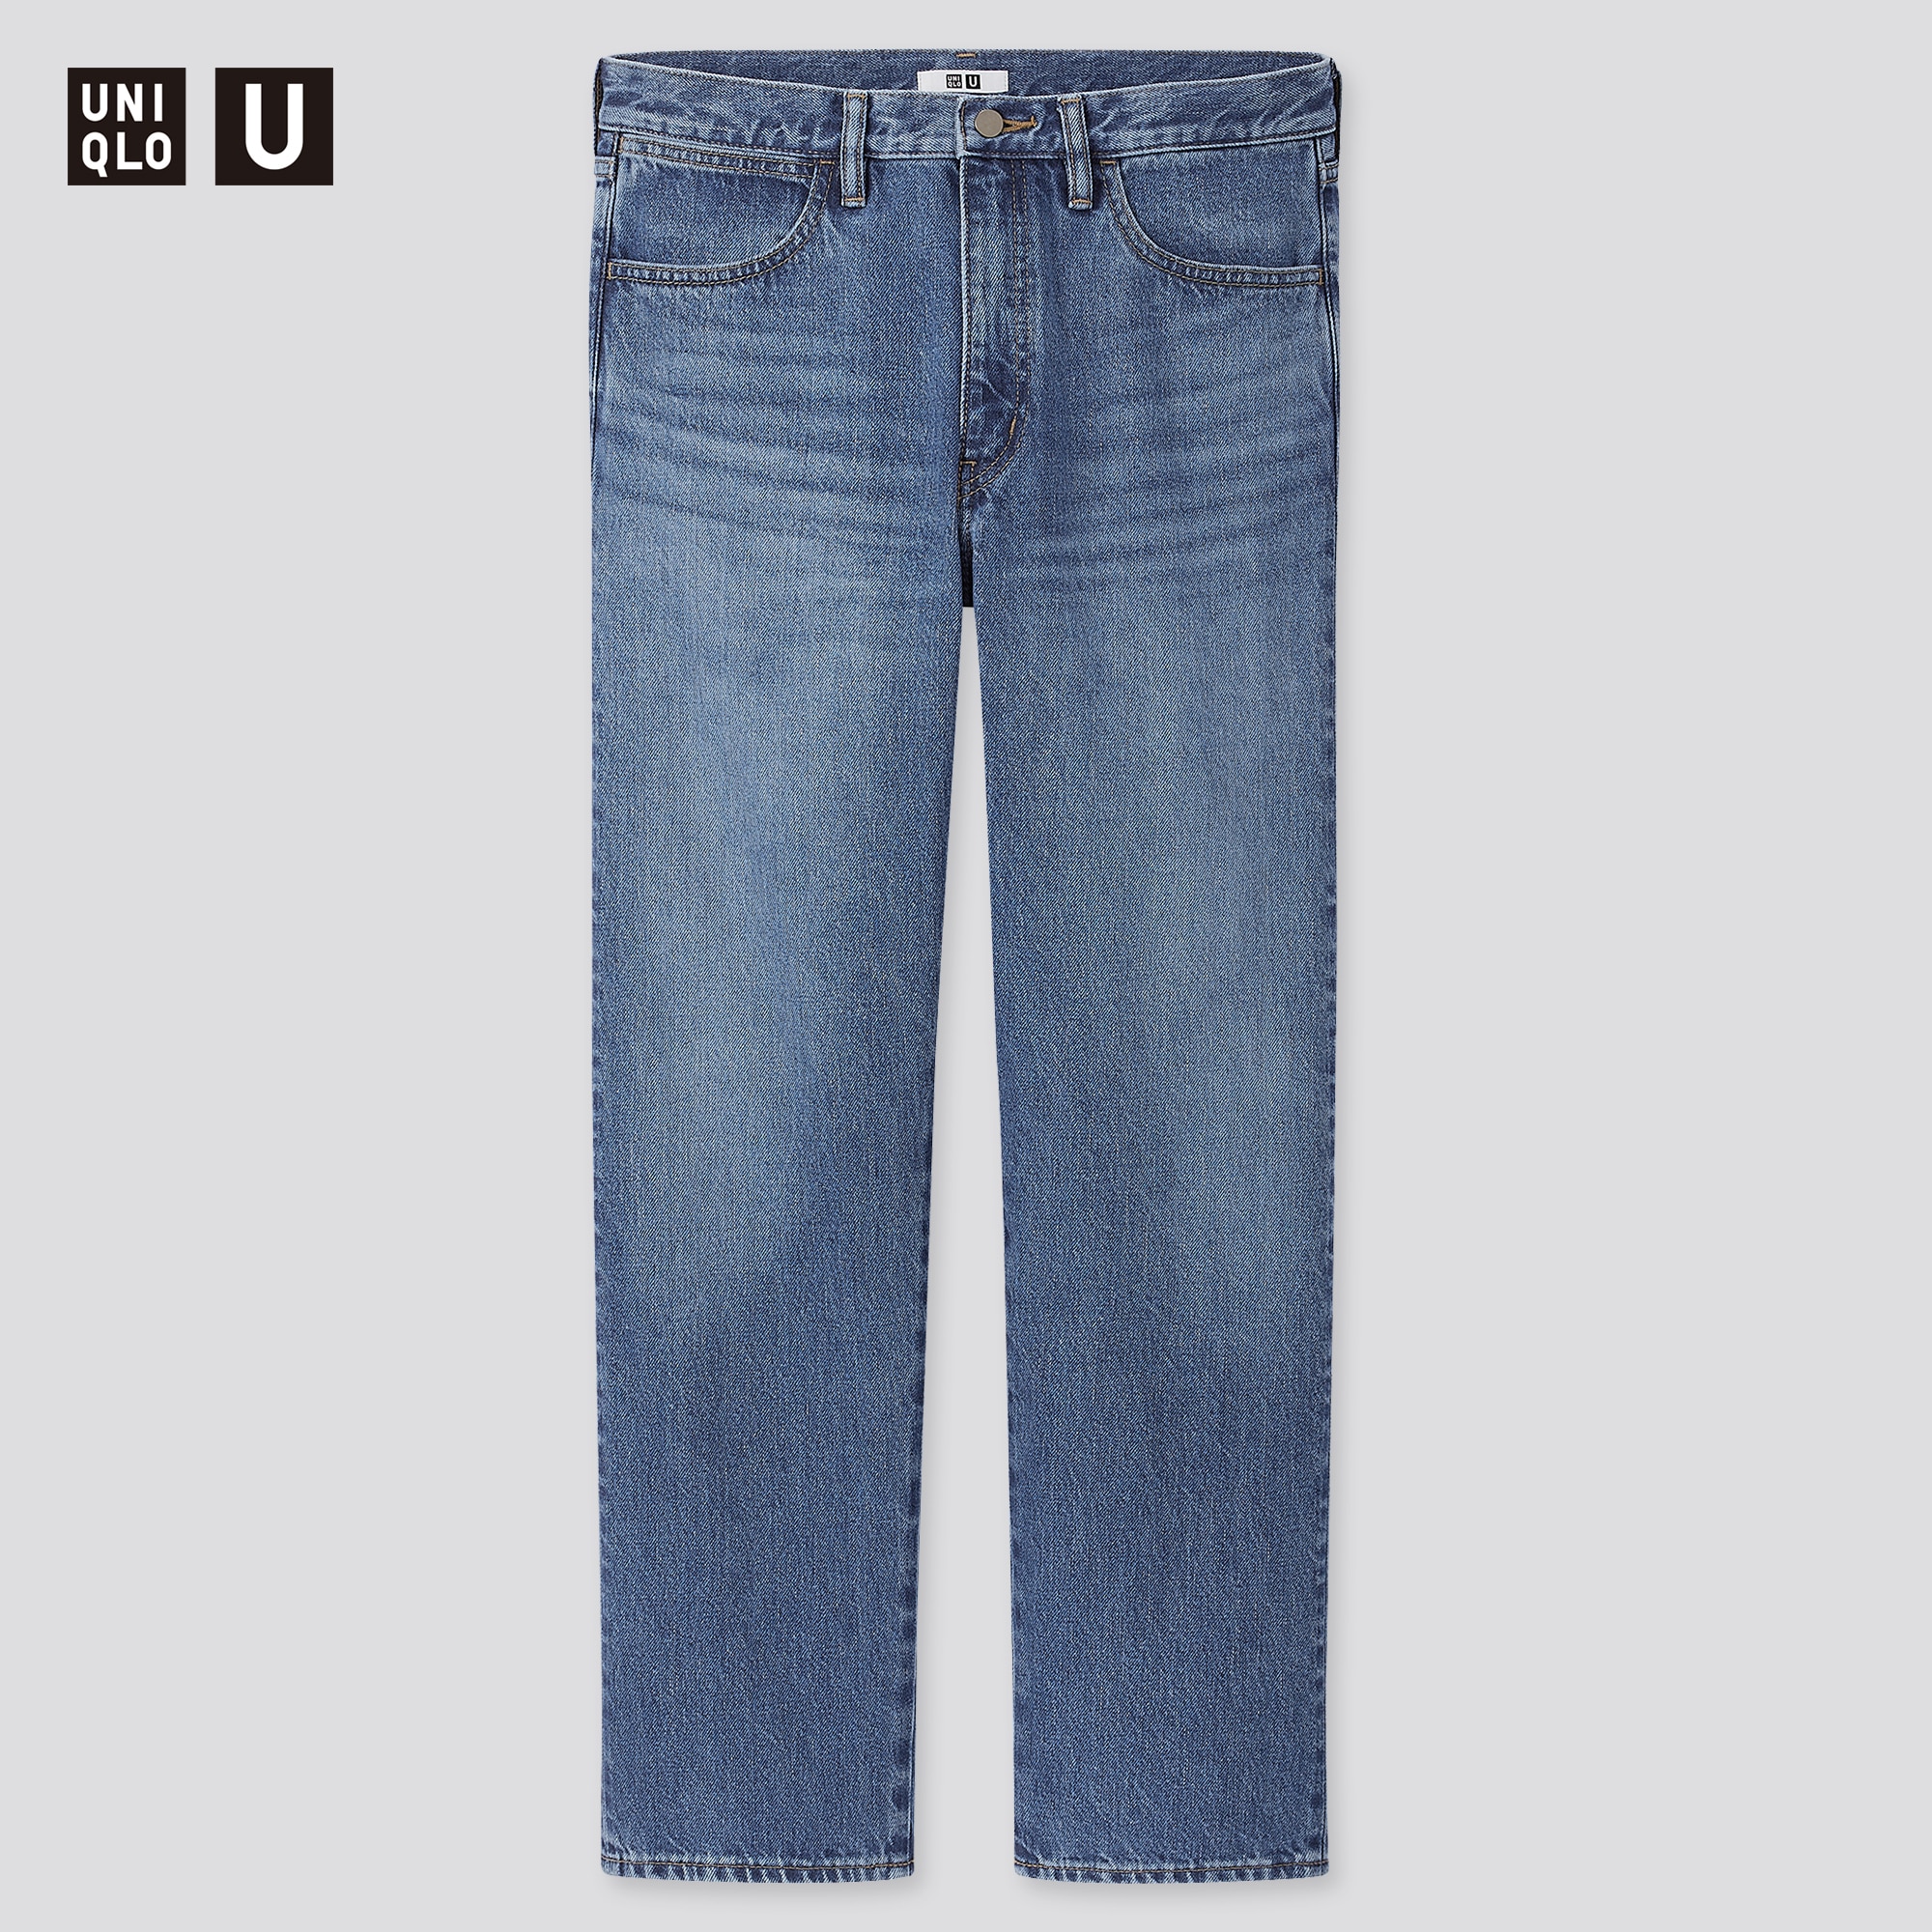 Jeans looking good on all shapes and sizes, periodt! 😎👖 Get this jeans  collection only at UNIQLO.COM, UNIQLO APP, and UNIQLO Store